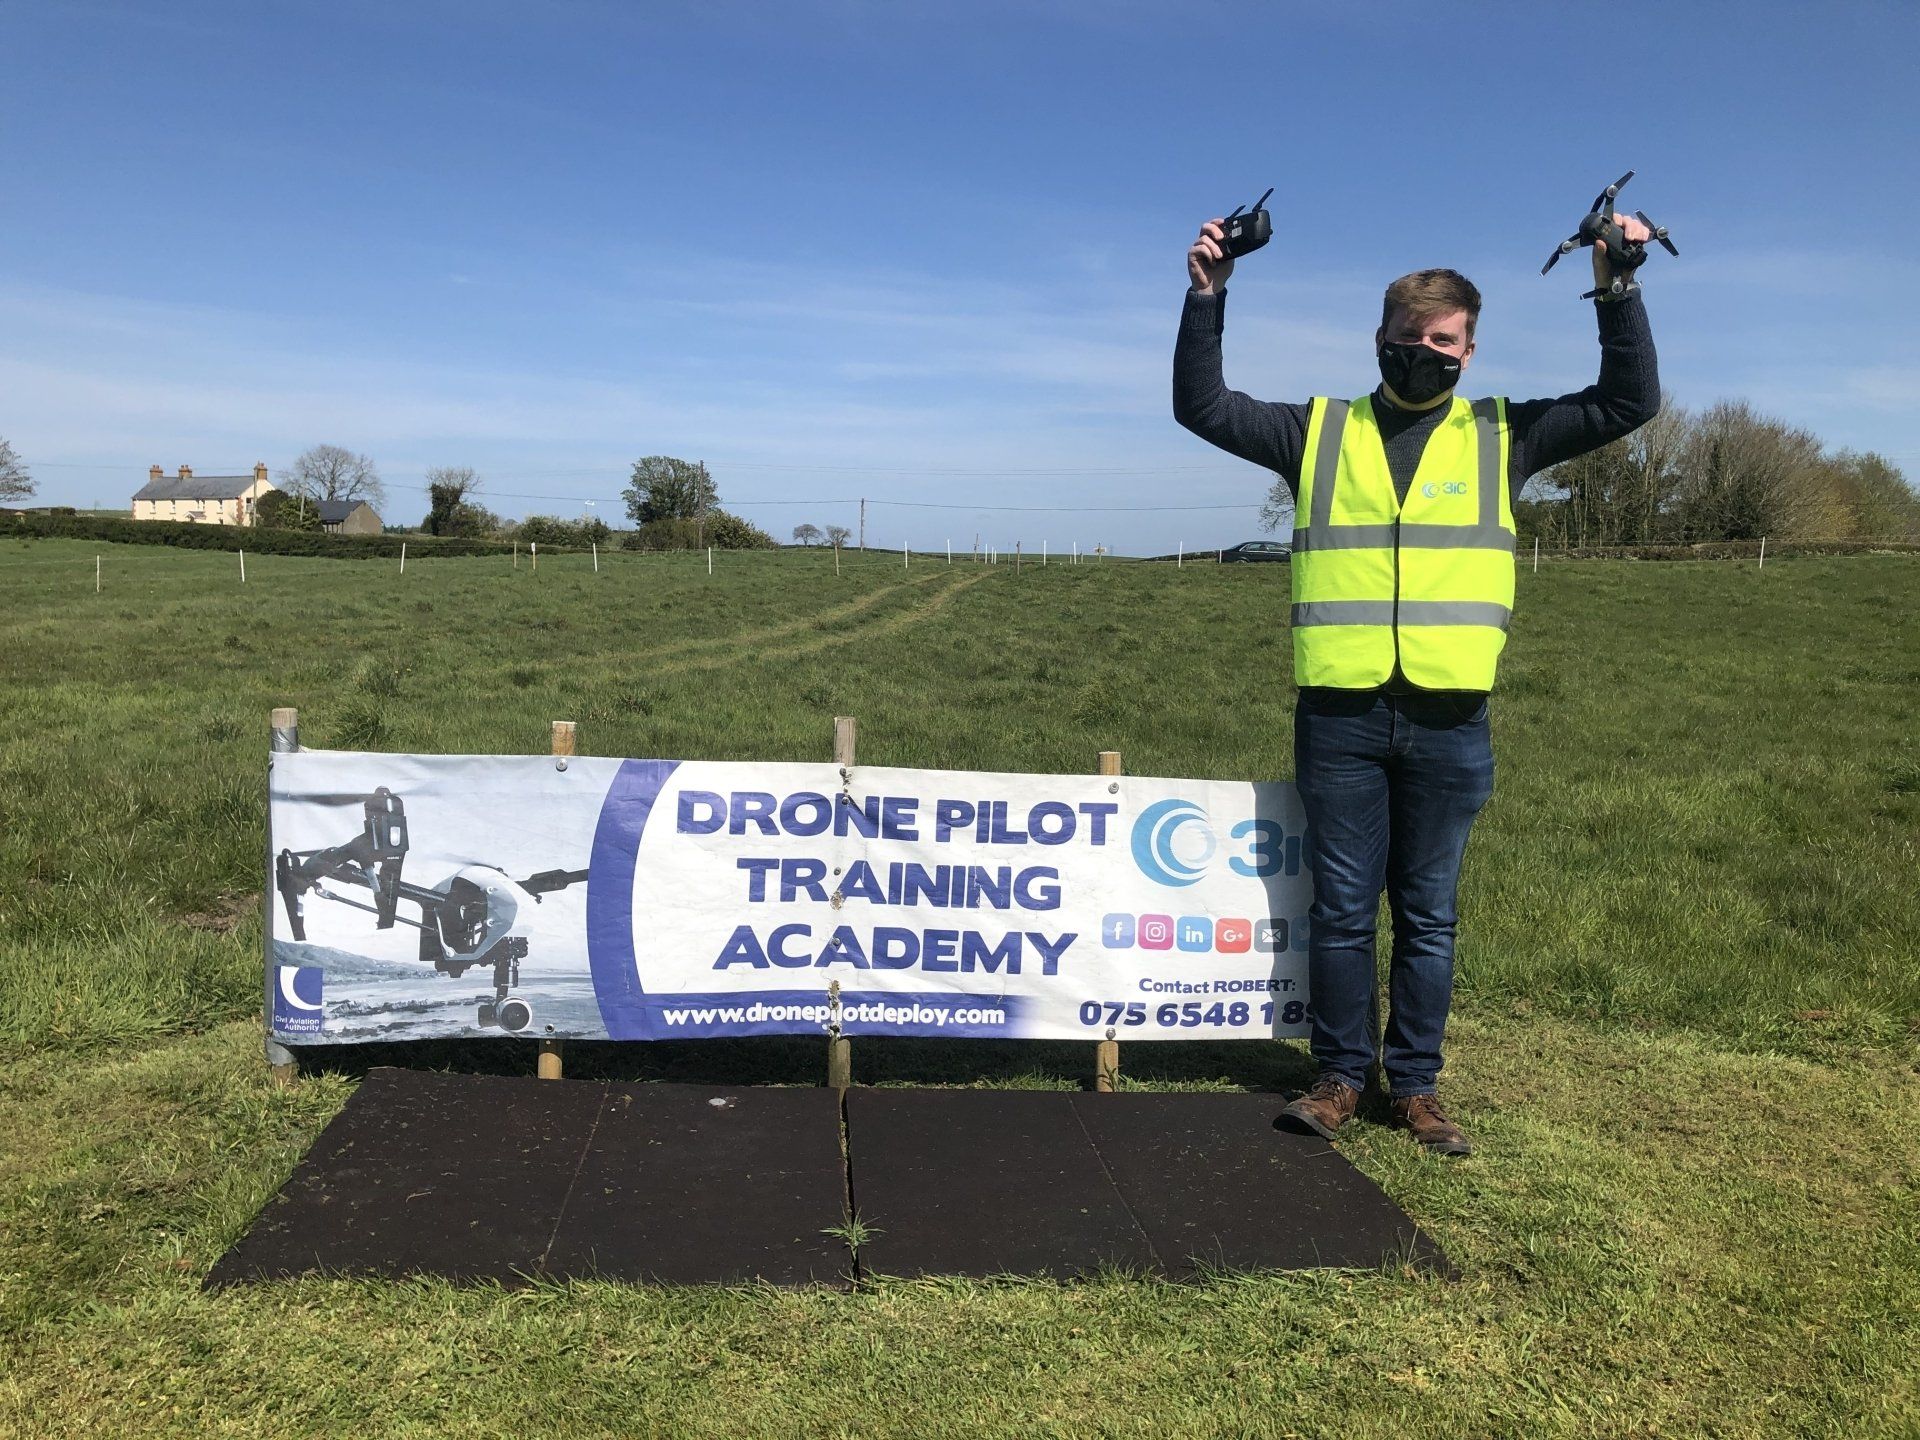 Daniel from Jacopa Ltd who successfully passed his A2 CofC atDrone Pilot Training Academy Belfast, Northern Ireland.